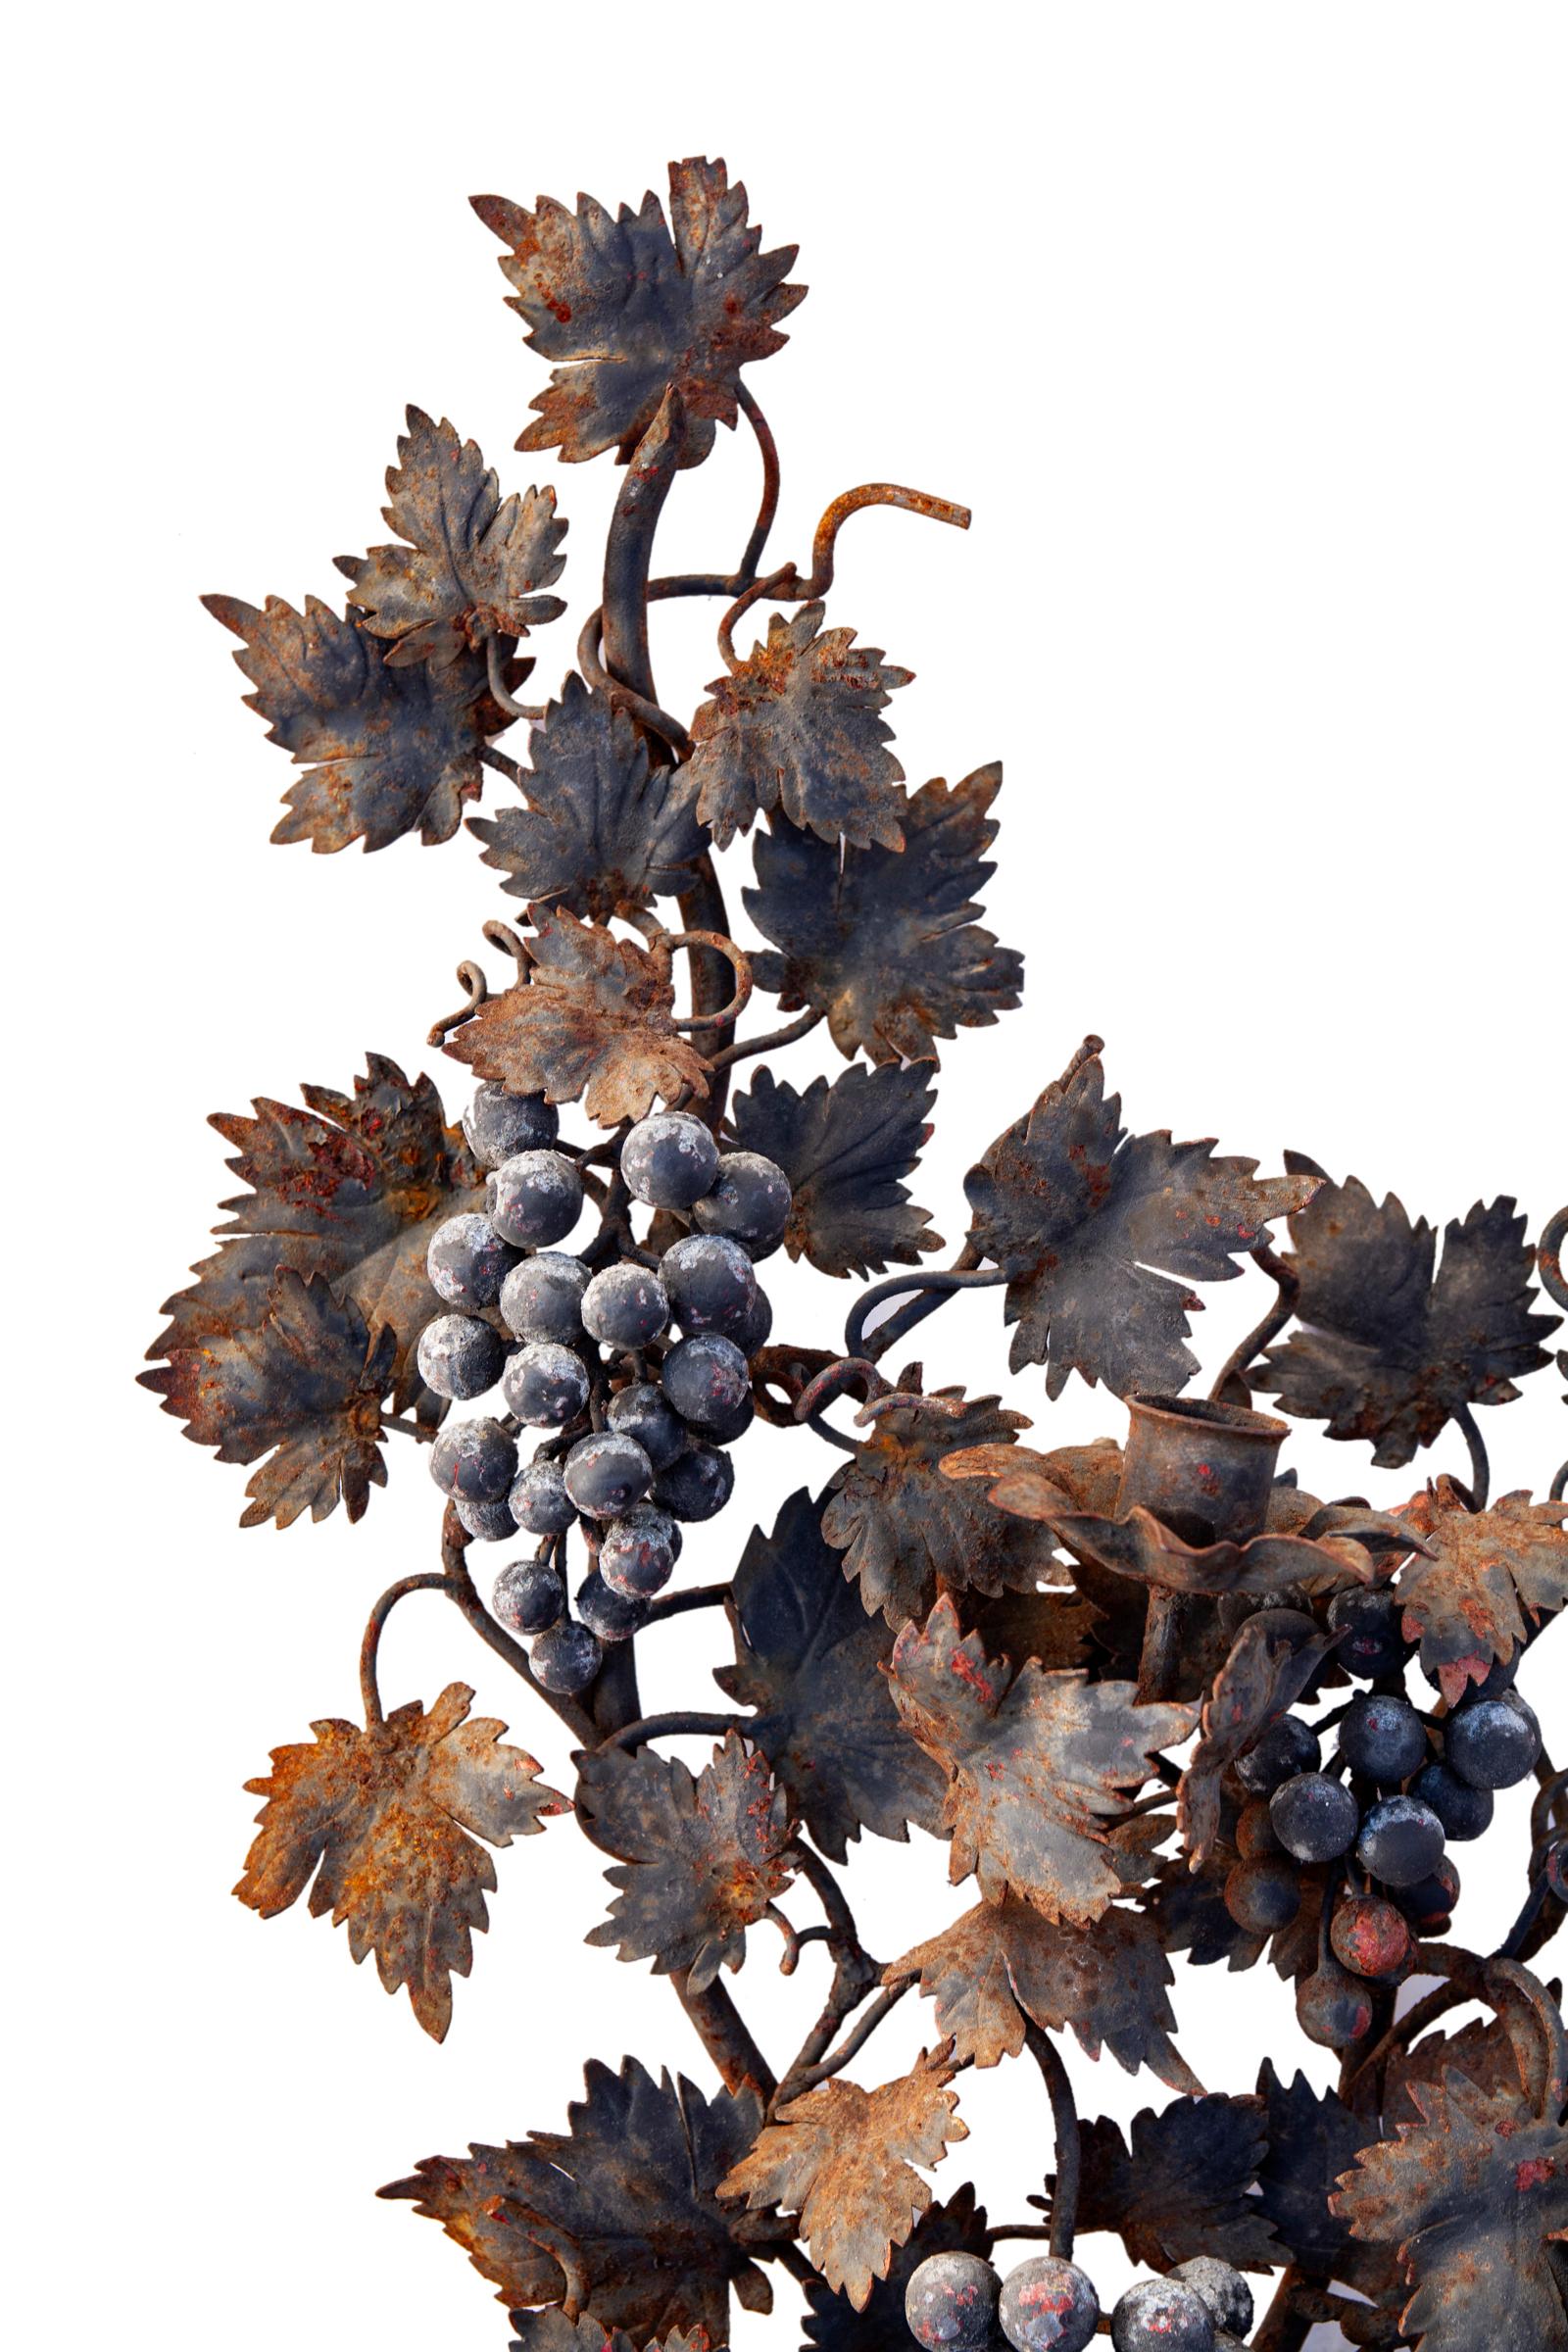 Charming rustic iron sconce, hand crafted in Italy.
Clusters of grapes are surrounded by lacy grape leaves. 
The iron grapevines are very detailed. 
As found, lovely aged patina.